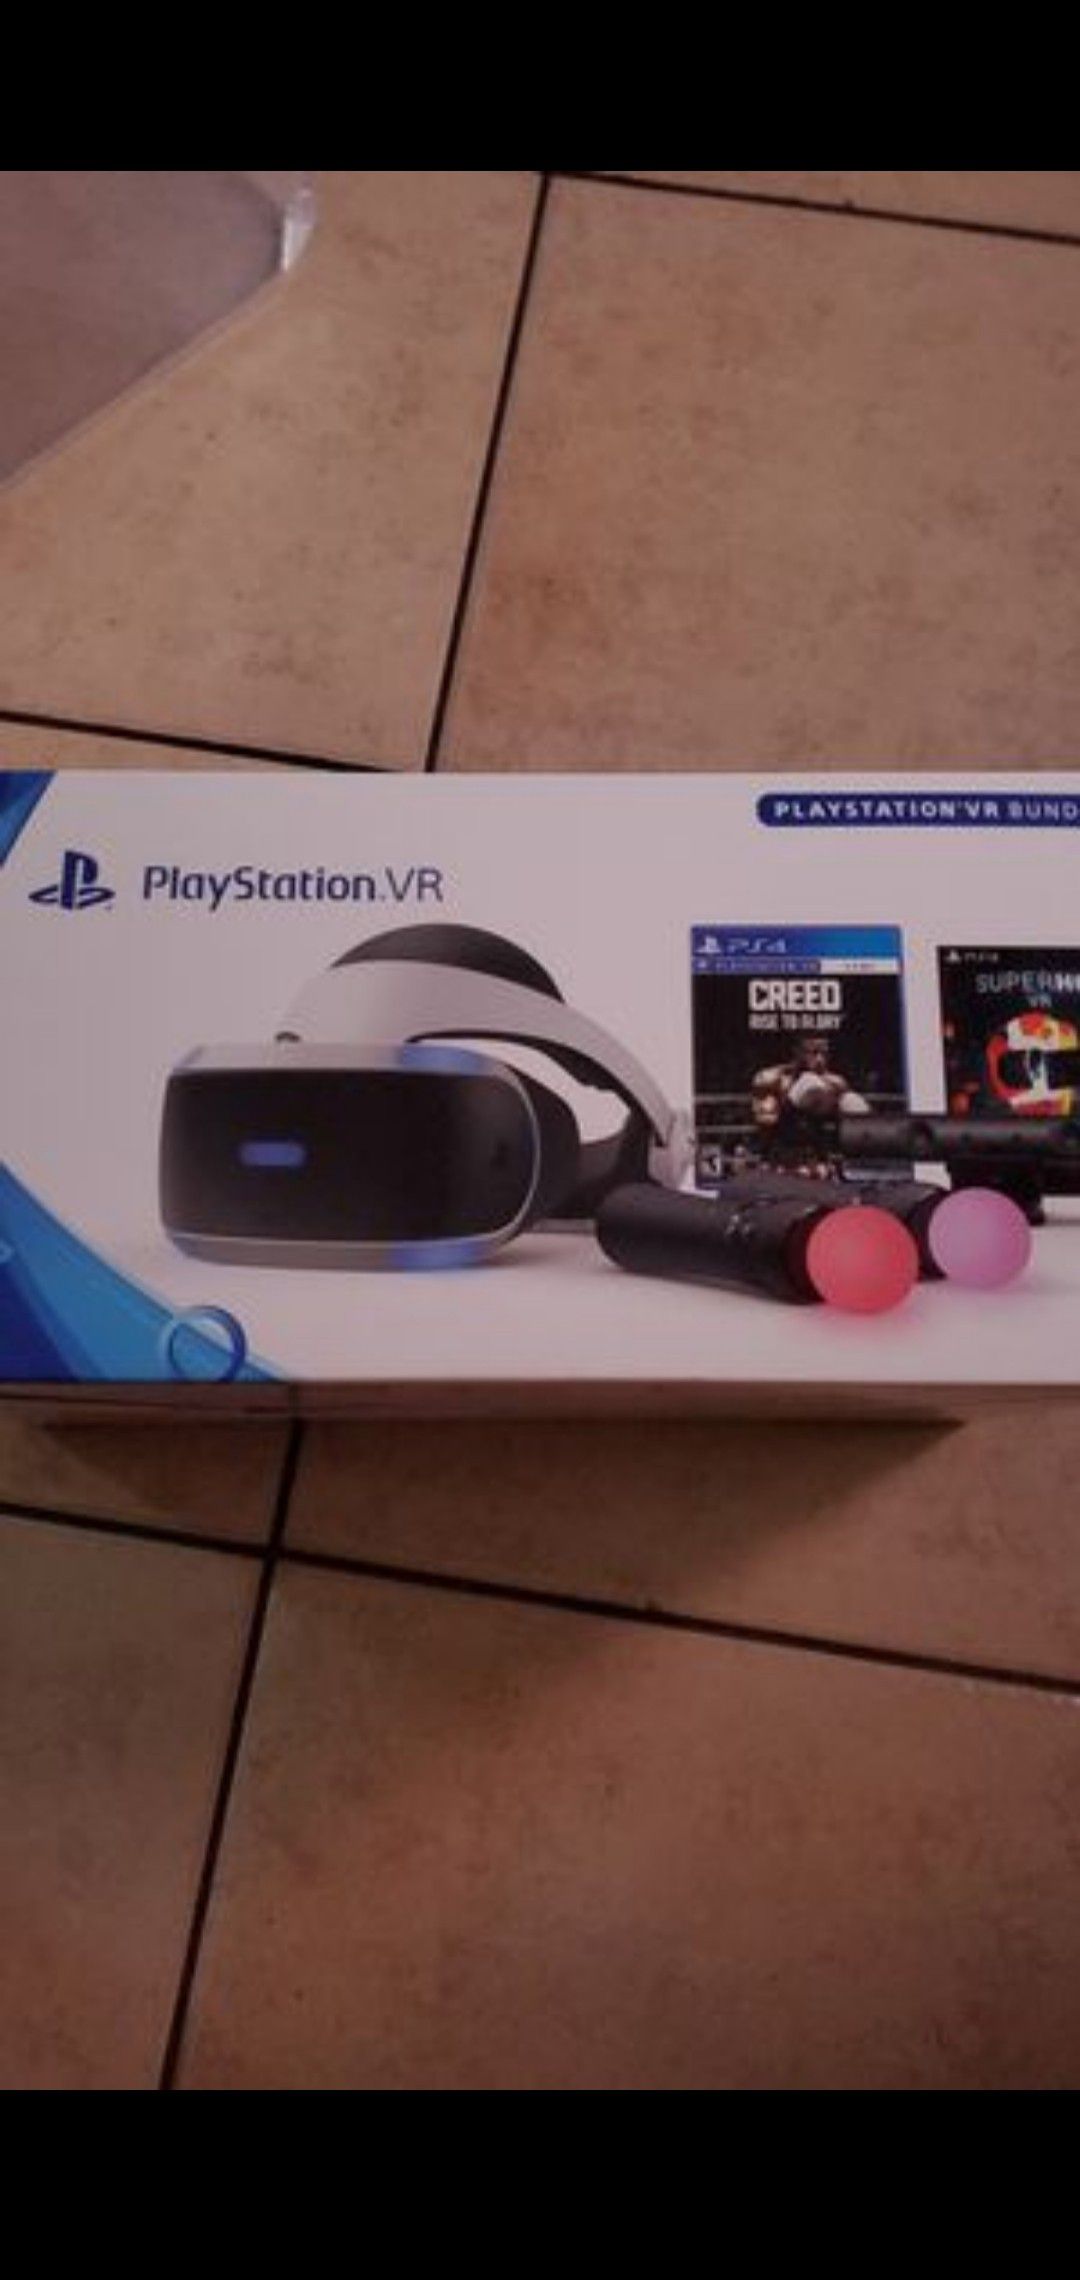 Playstation vr bundle with two joysticks and two games